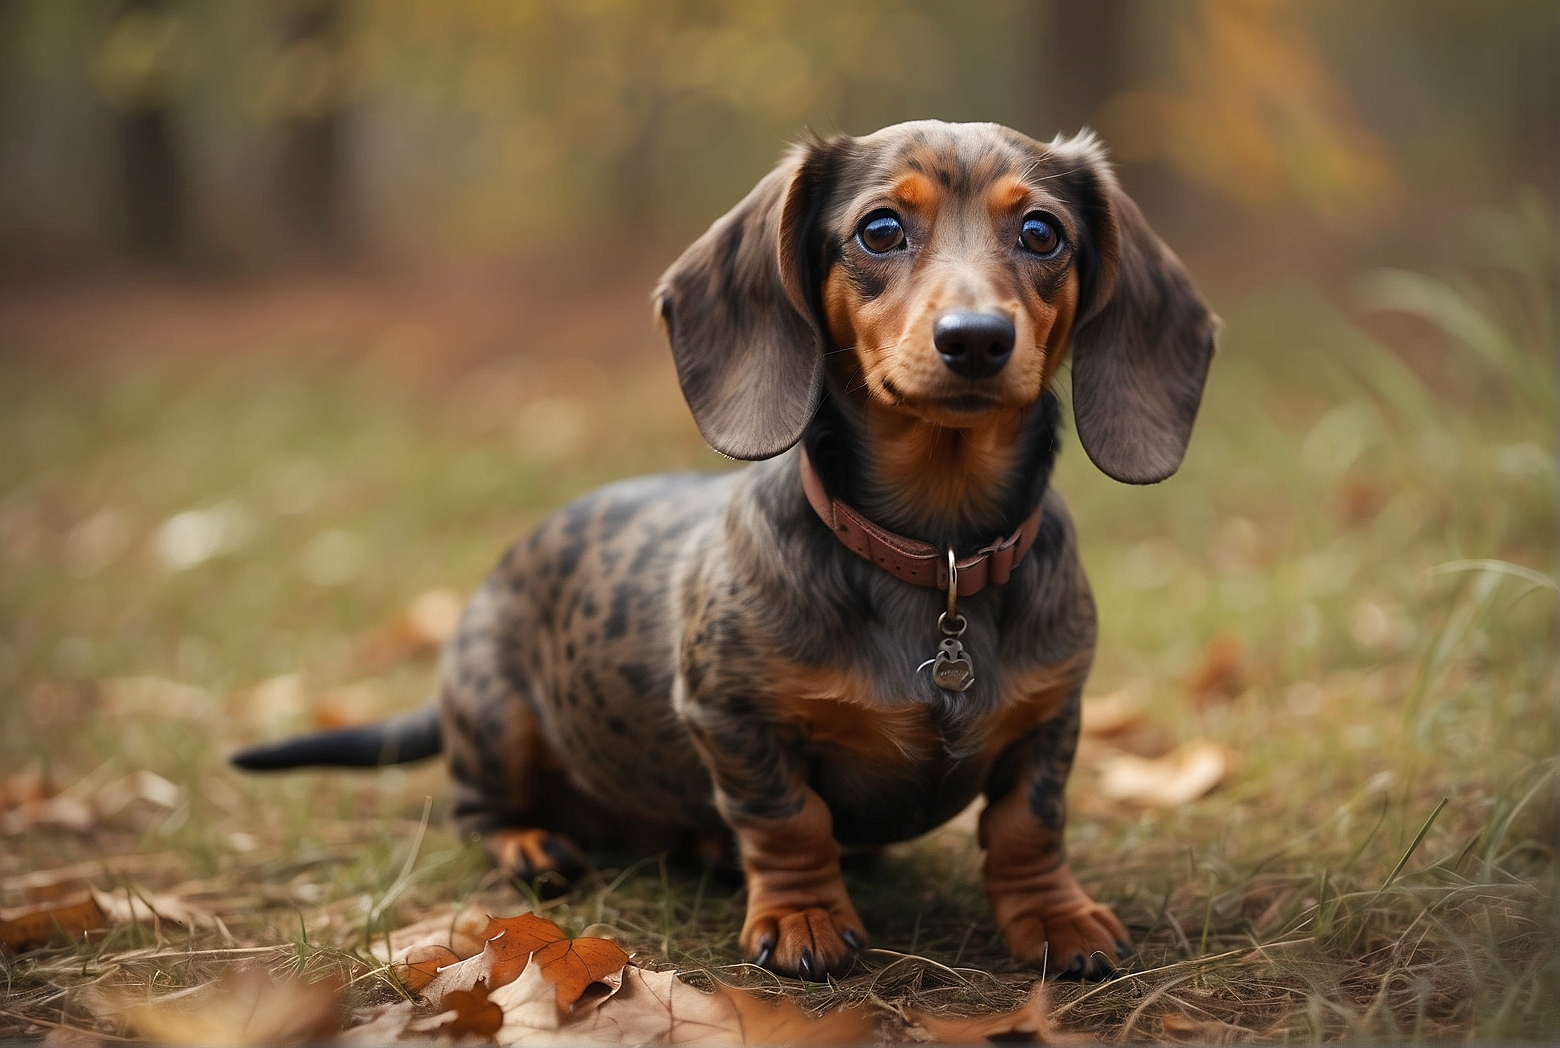 Why Are Dachshunds So Popular